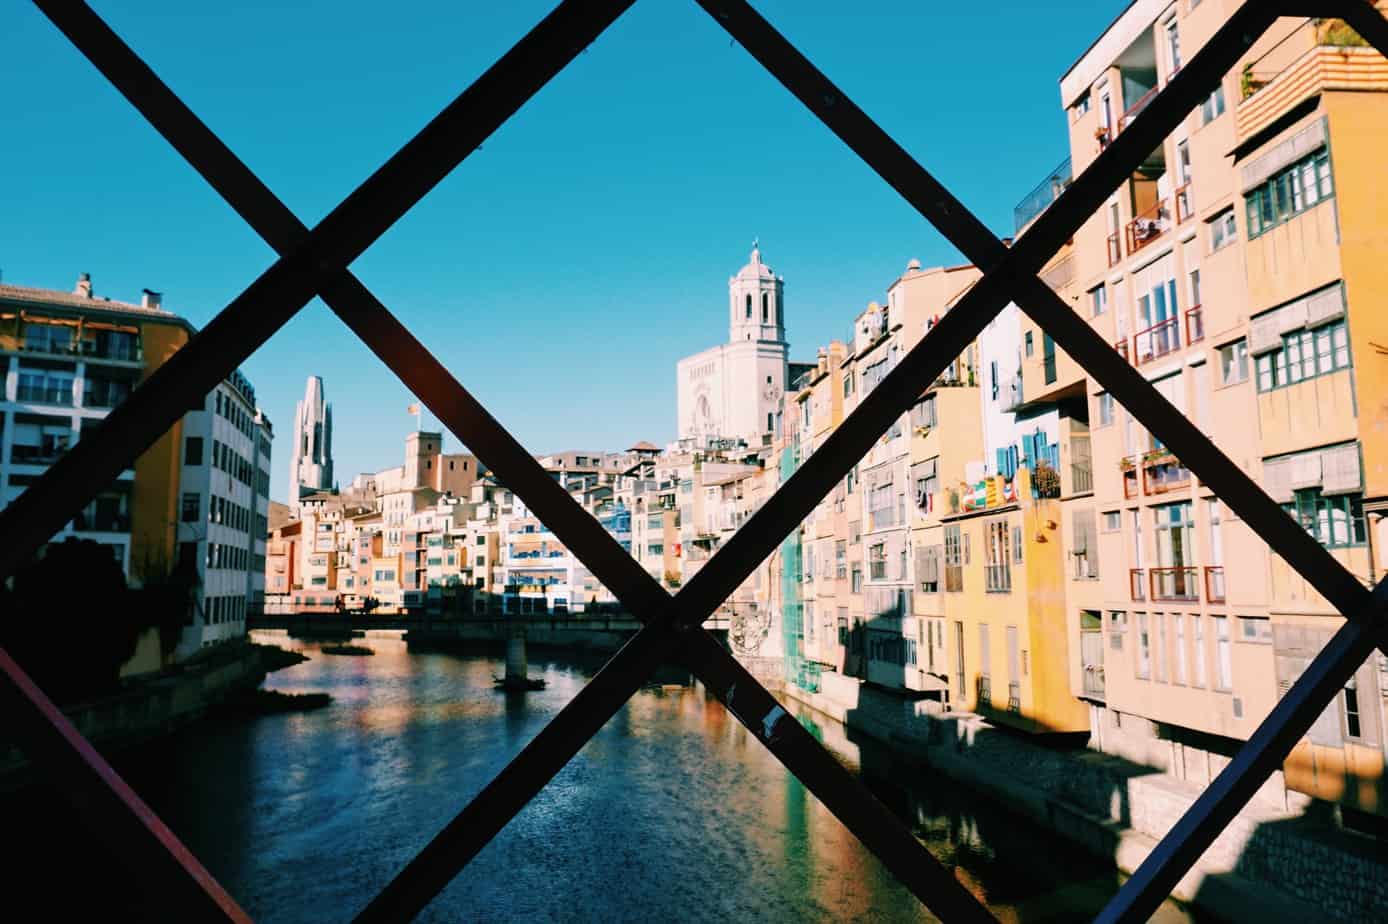 Everyone loves a freebie, so take advantage of these 10 free things to do in Girona, Spain! This under the radar city is full of sights, legends, and more.